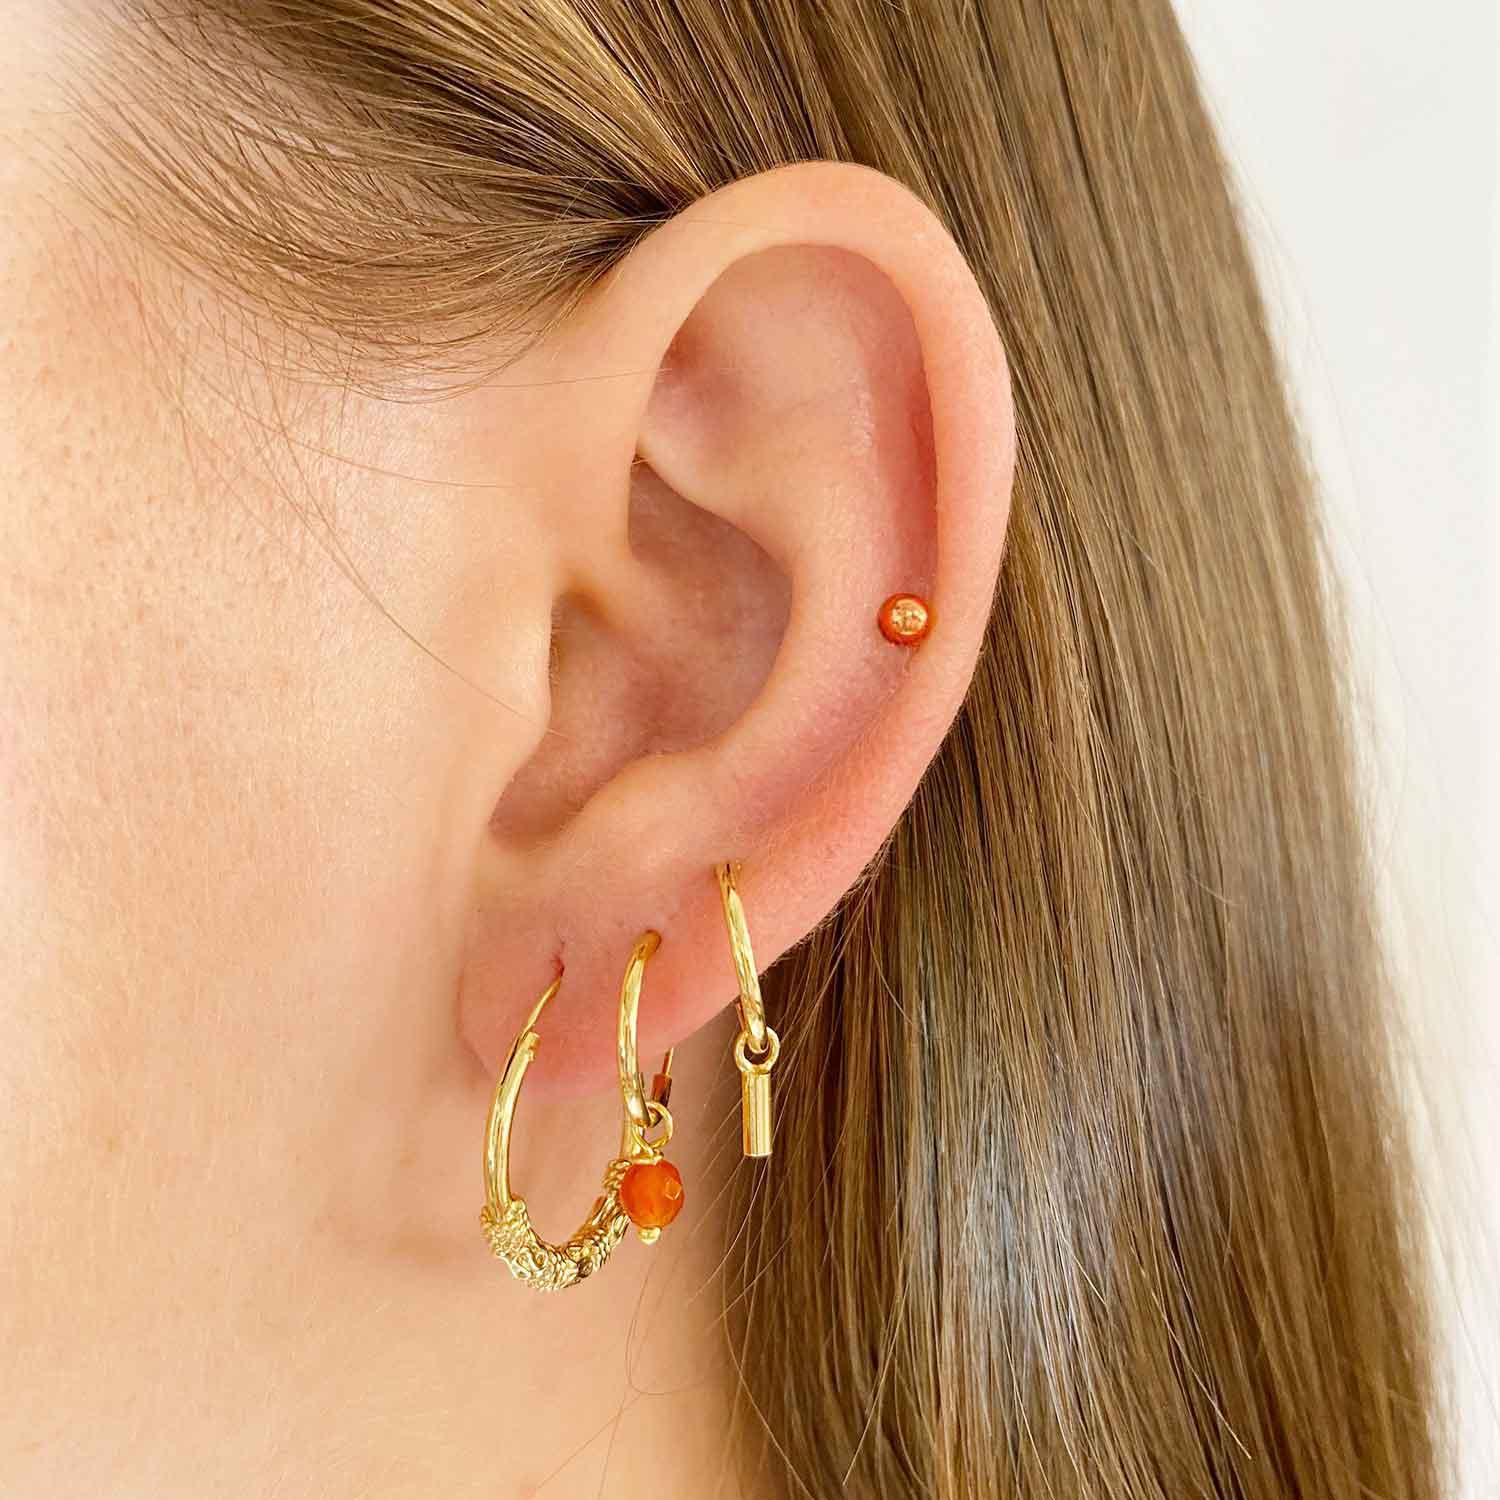 Gold Plated Hoop Earrings with Rod 12 MM